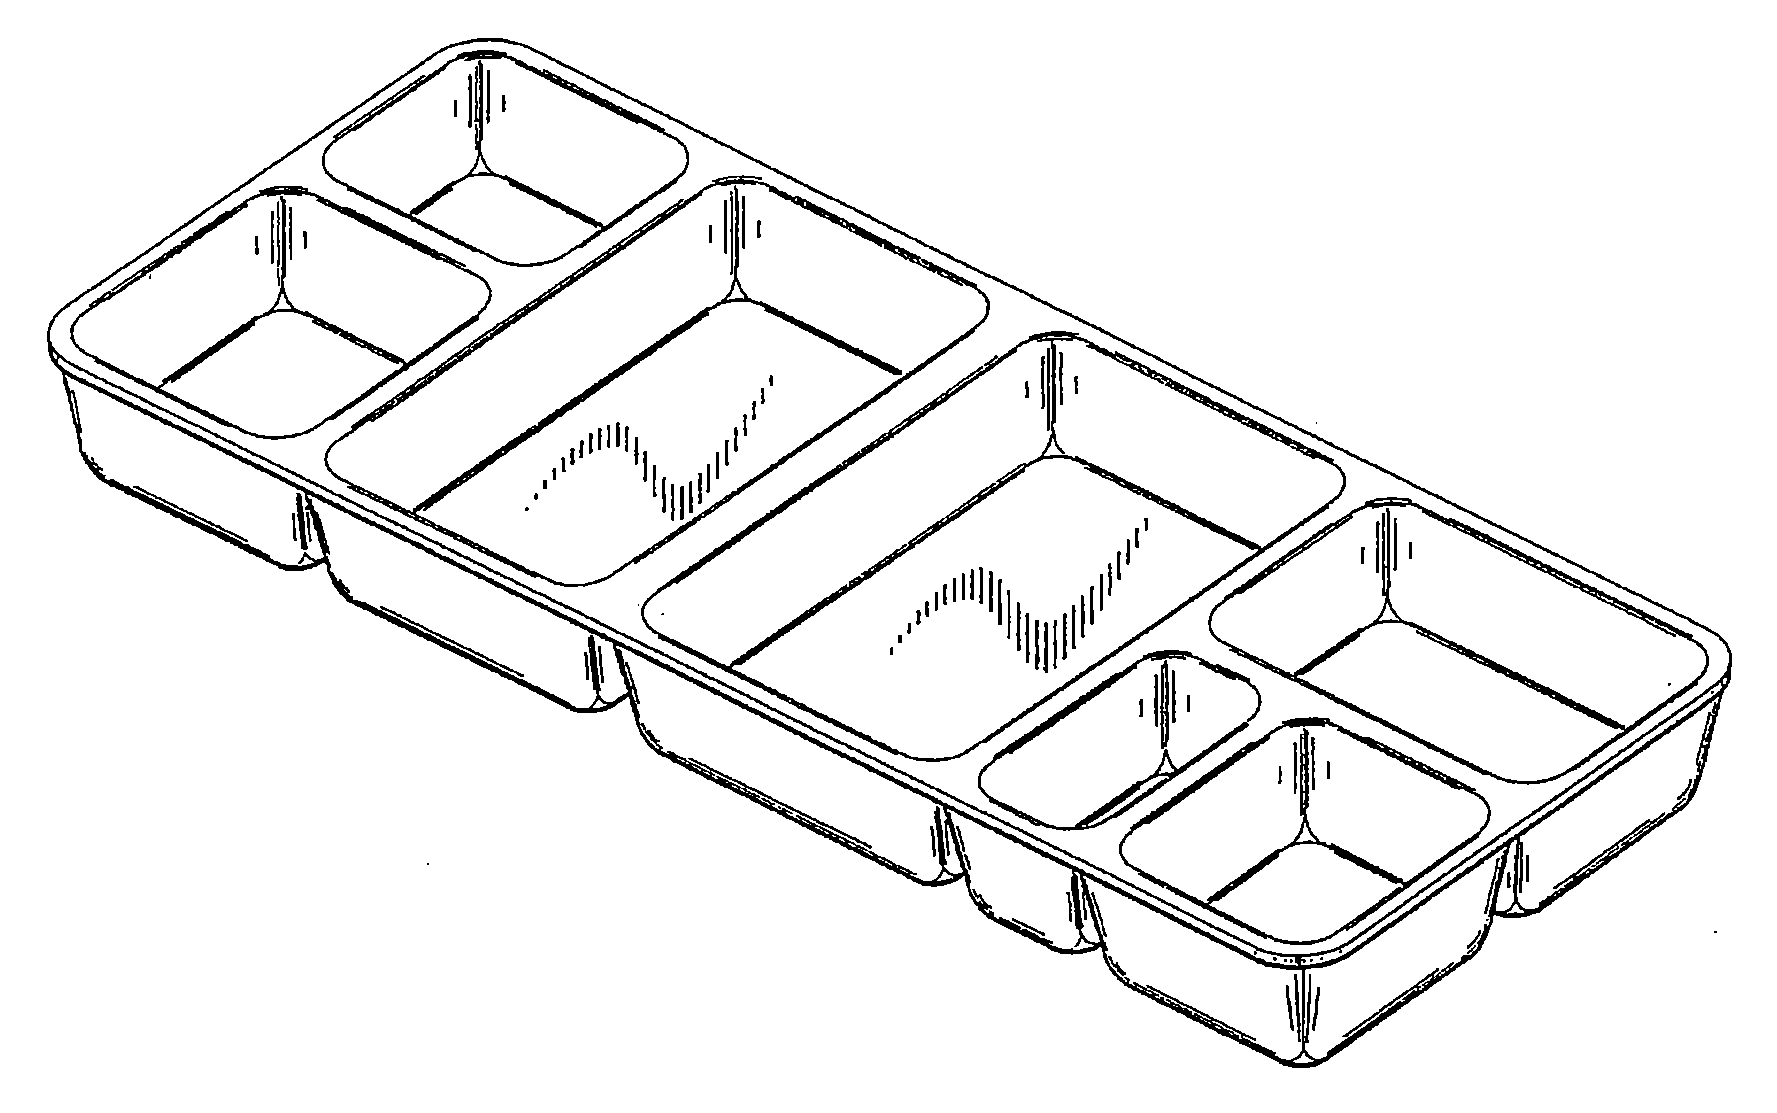 Example of a design for a compartmented tray with a rectangularperimeter.
